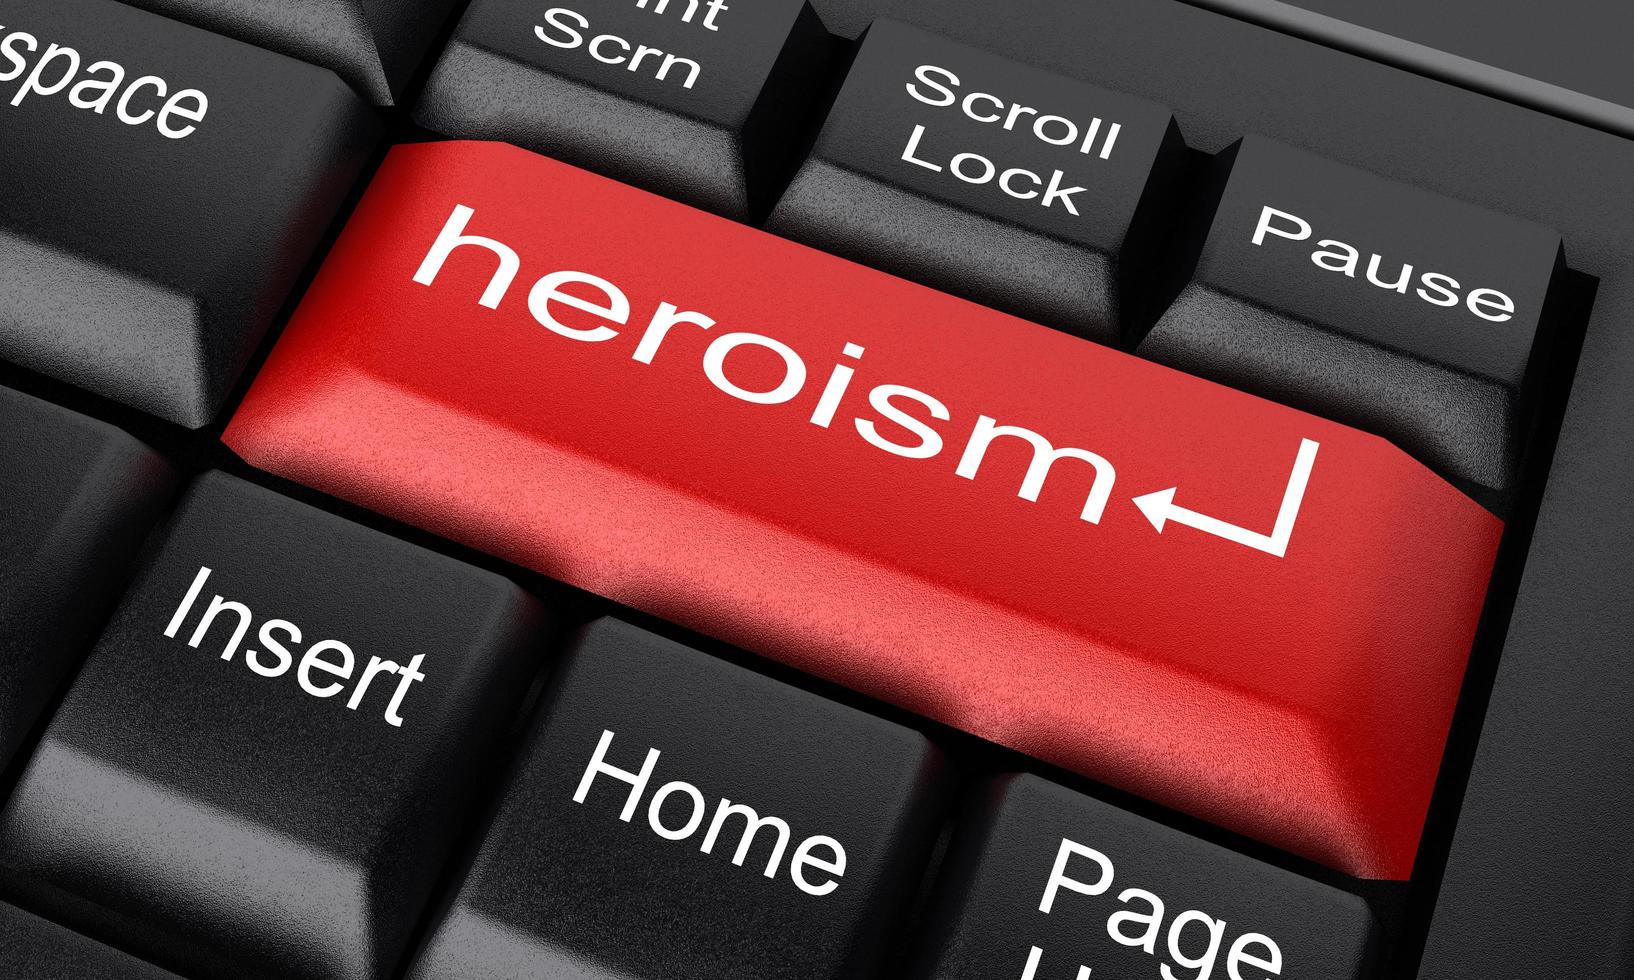 heroism word on red keyboard button photo